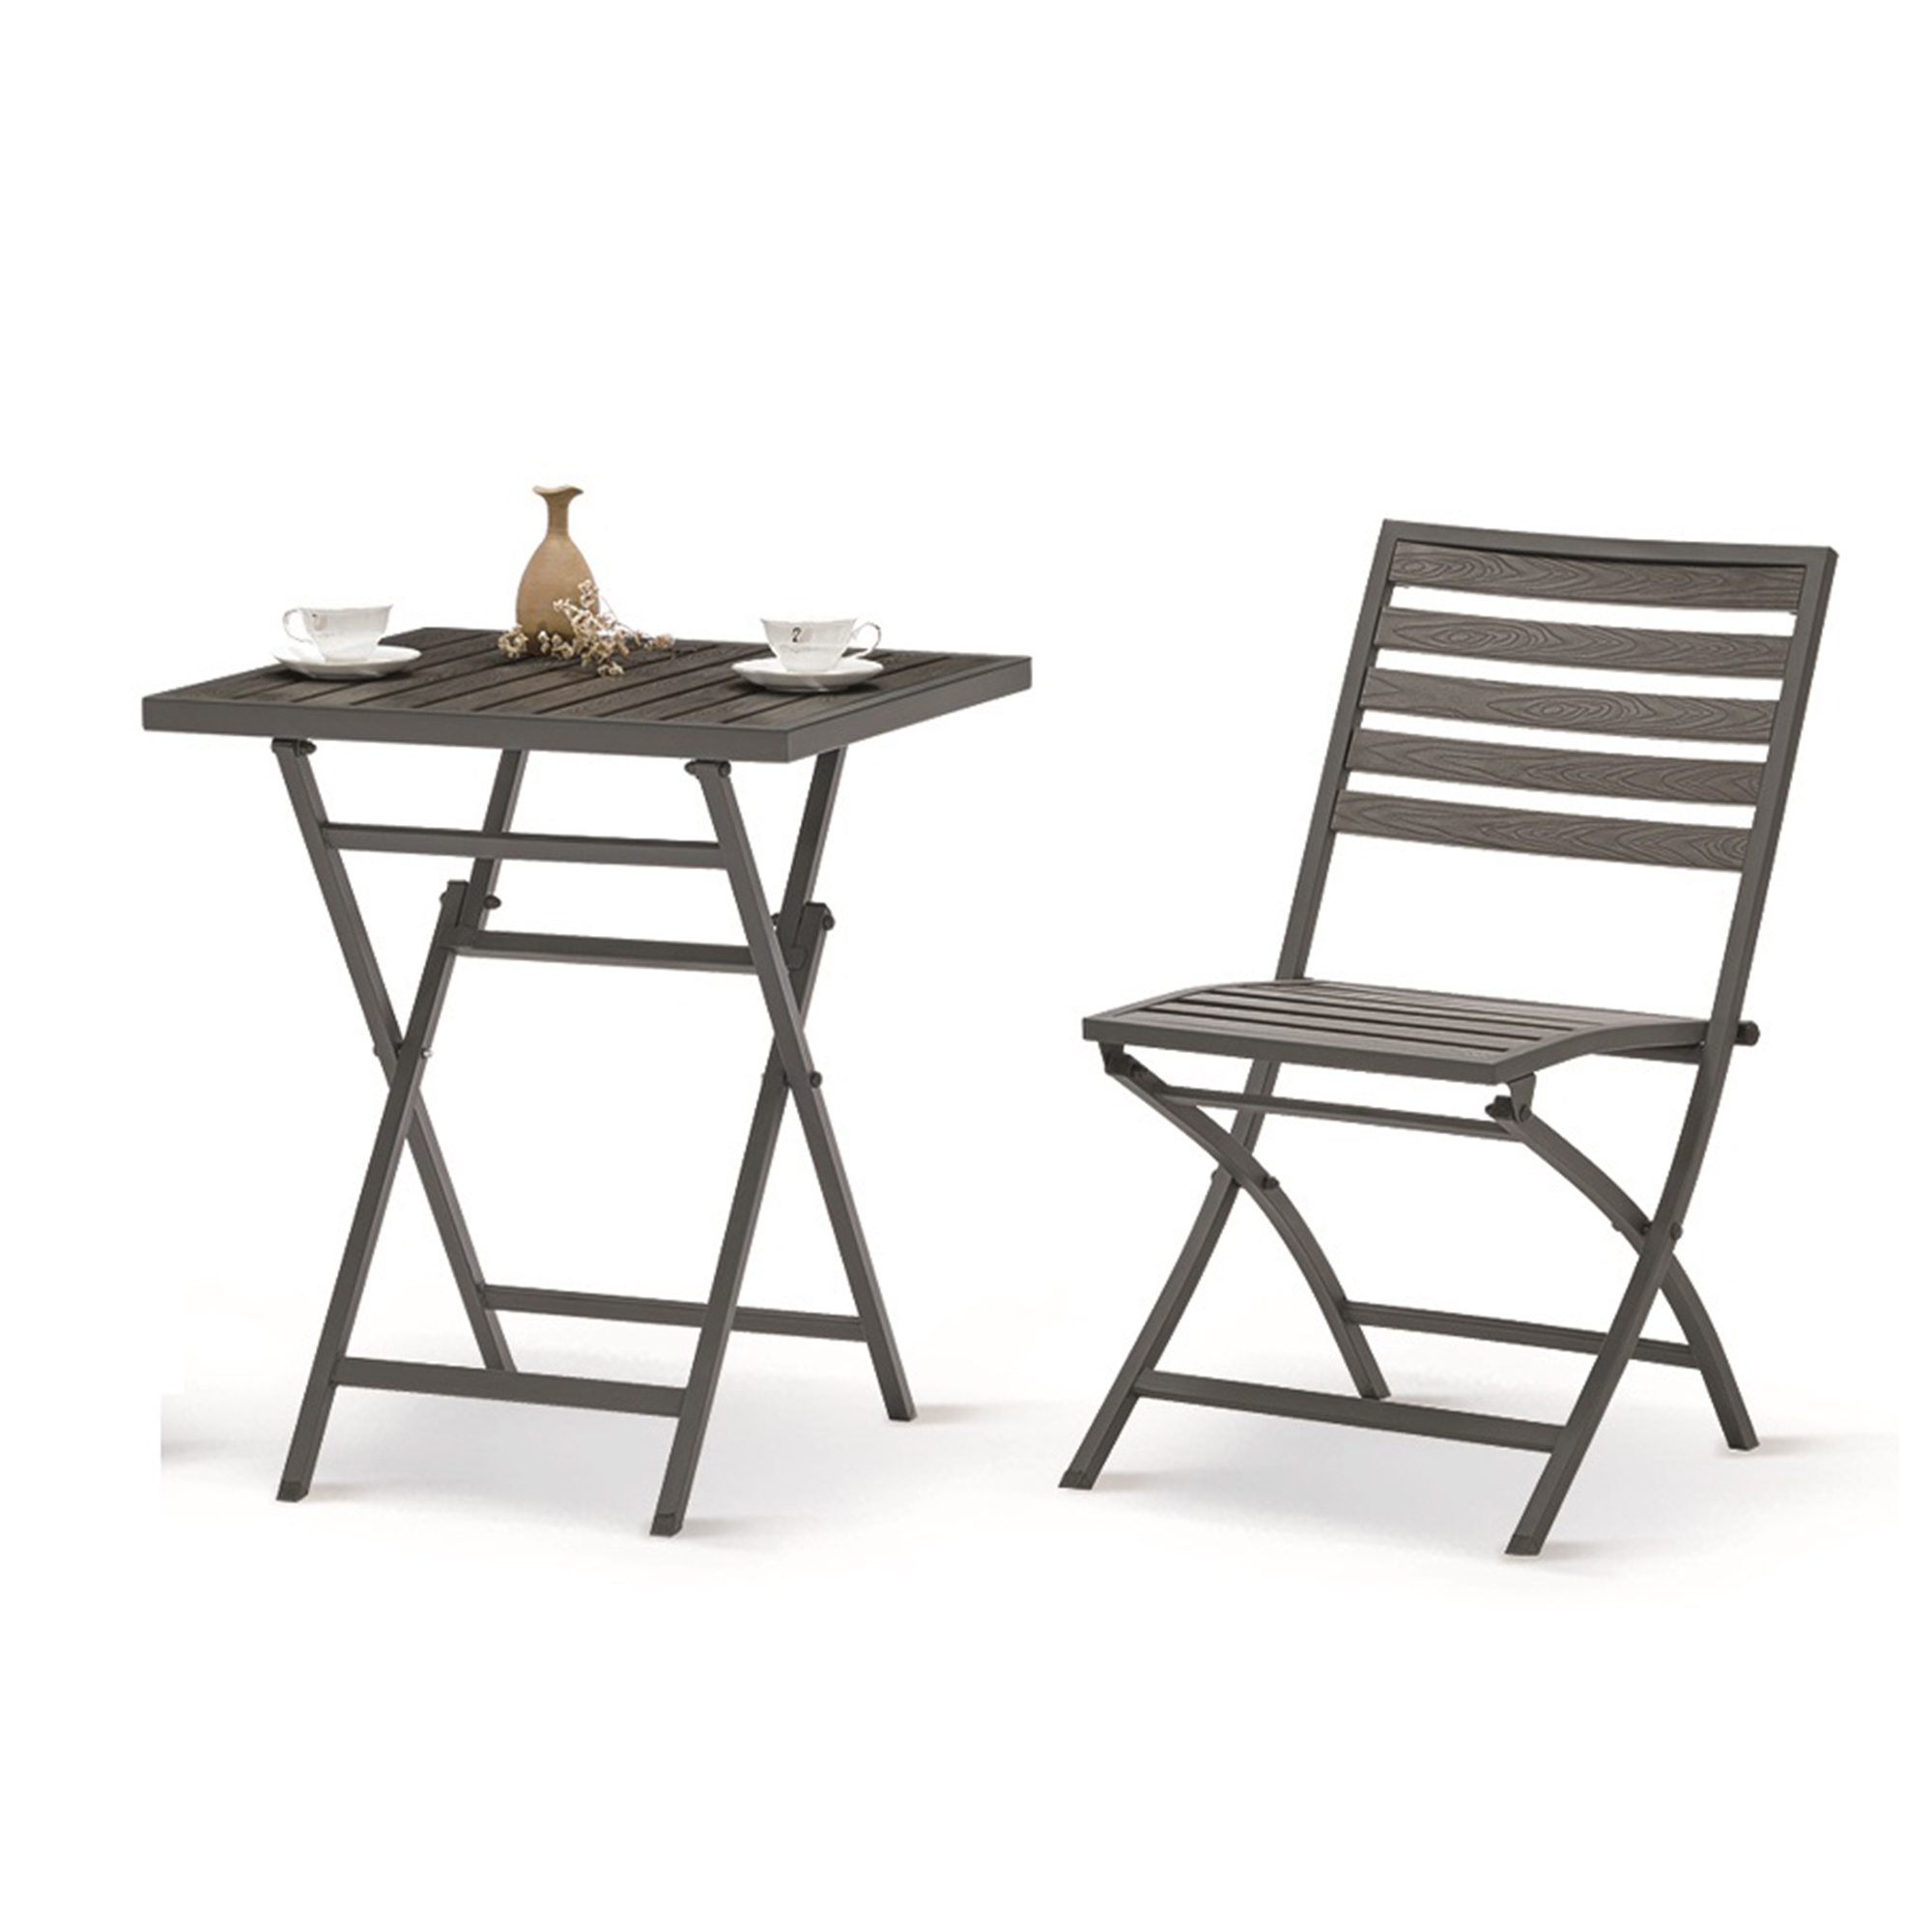 Modern Rattan Coffee Chair Table Set 3 PCS, Aukfa Modern Rocking Bistro Set Rattan Chair, Outdoor Furniture Rattan Chair, Garden Set（Two Chair + One Table） - image 4 of 10